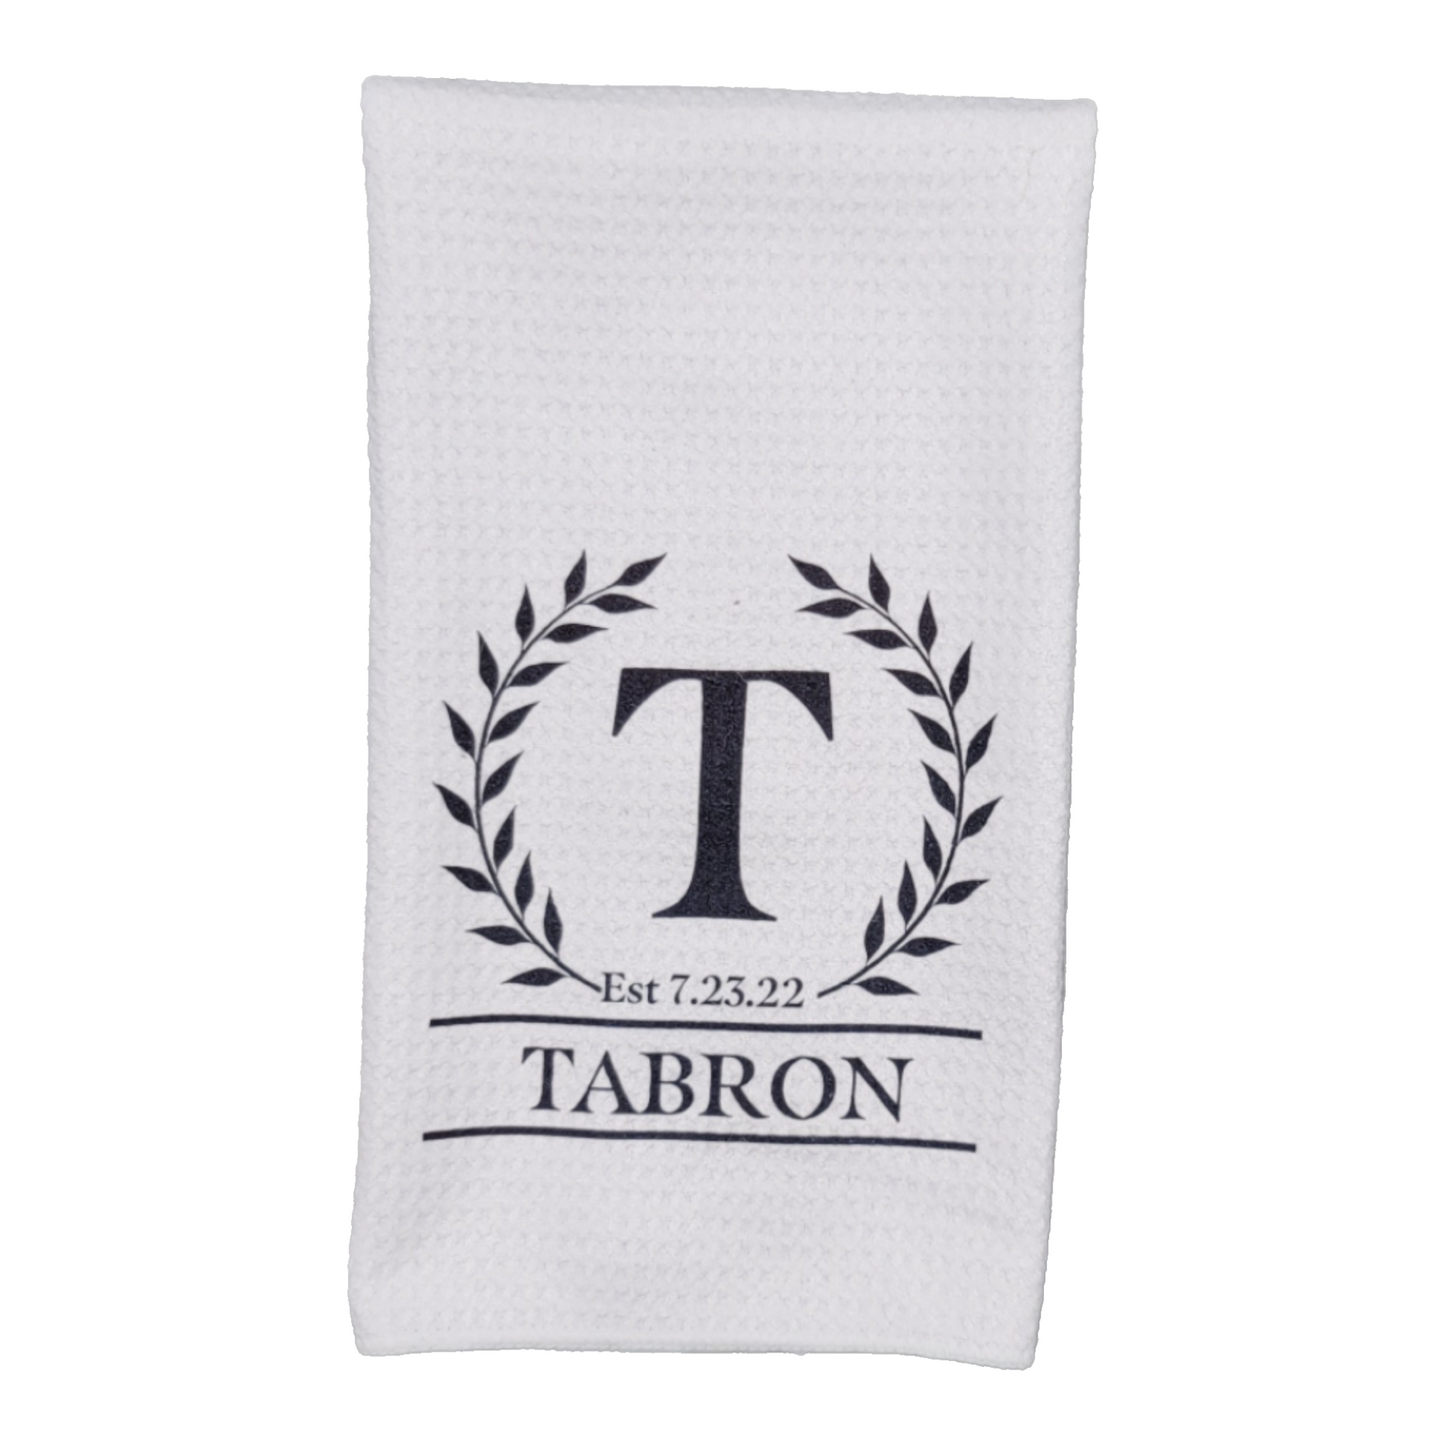 PERSONALIZED Waffle Kitchen Towel - Laurel Wreath w/Monogram, Name and Date